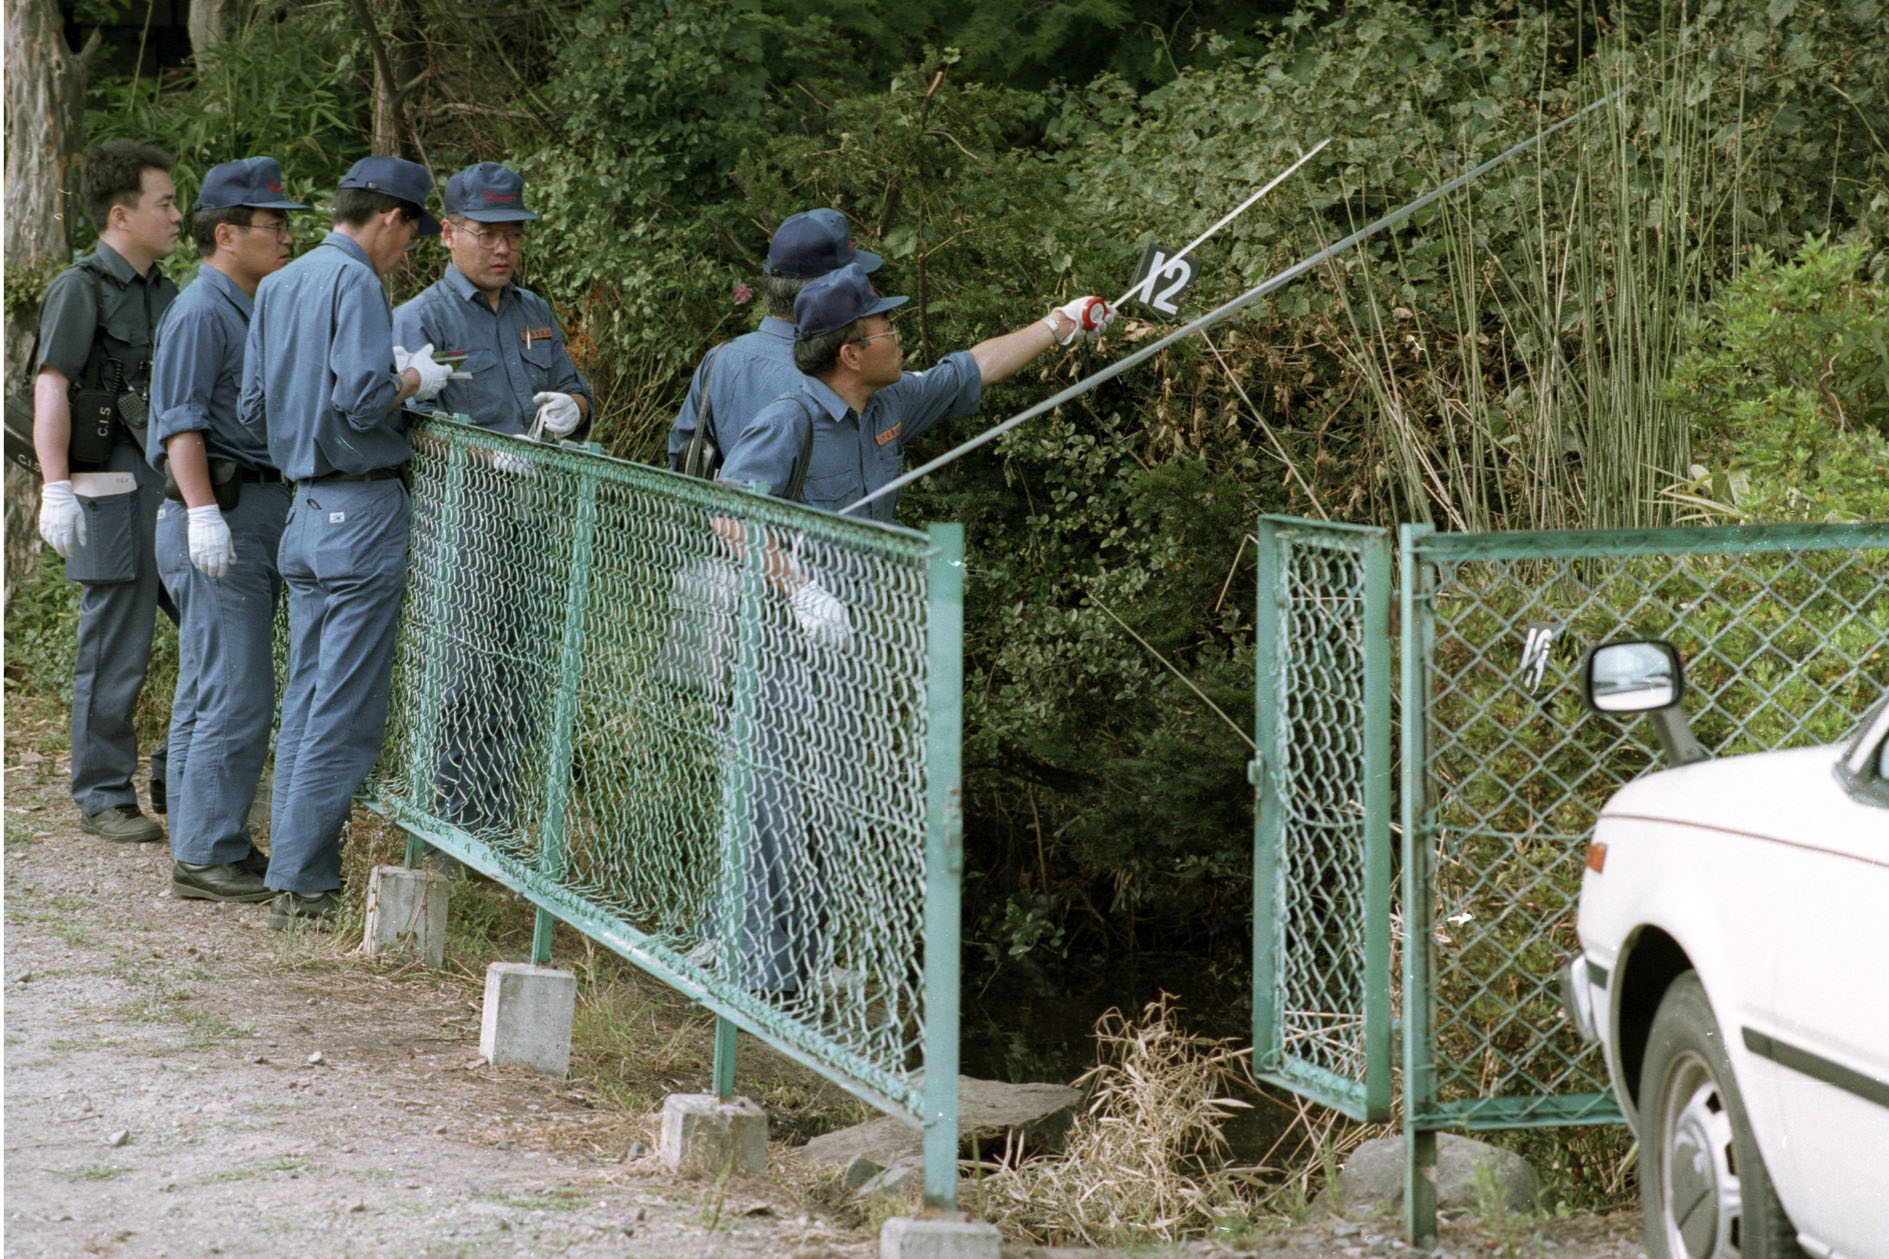 Investigators examine foliage surrounding a fish pond in Matsumoto, Nagano Prefecture, in June 1994 after sarin was detected in the area. | KYODO